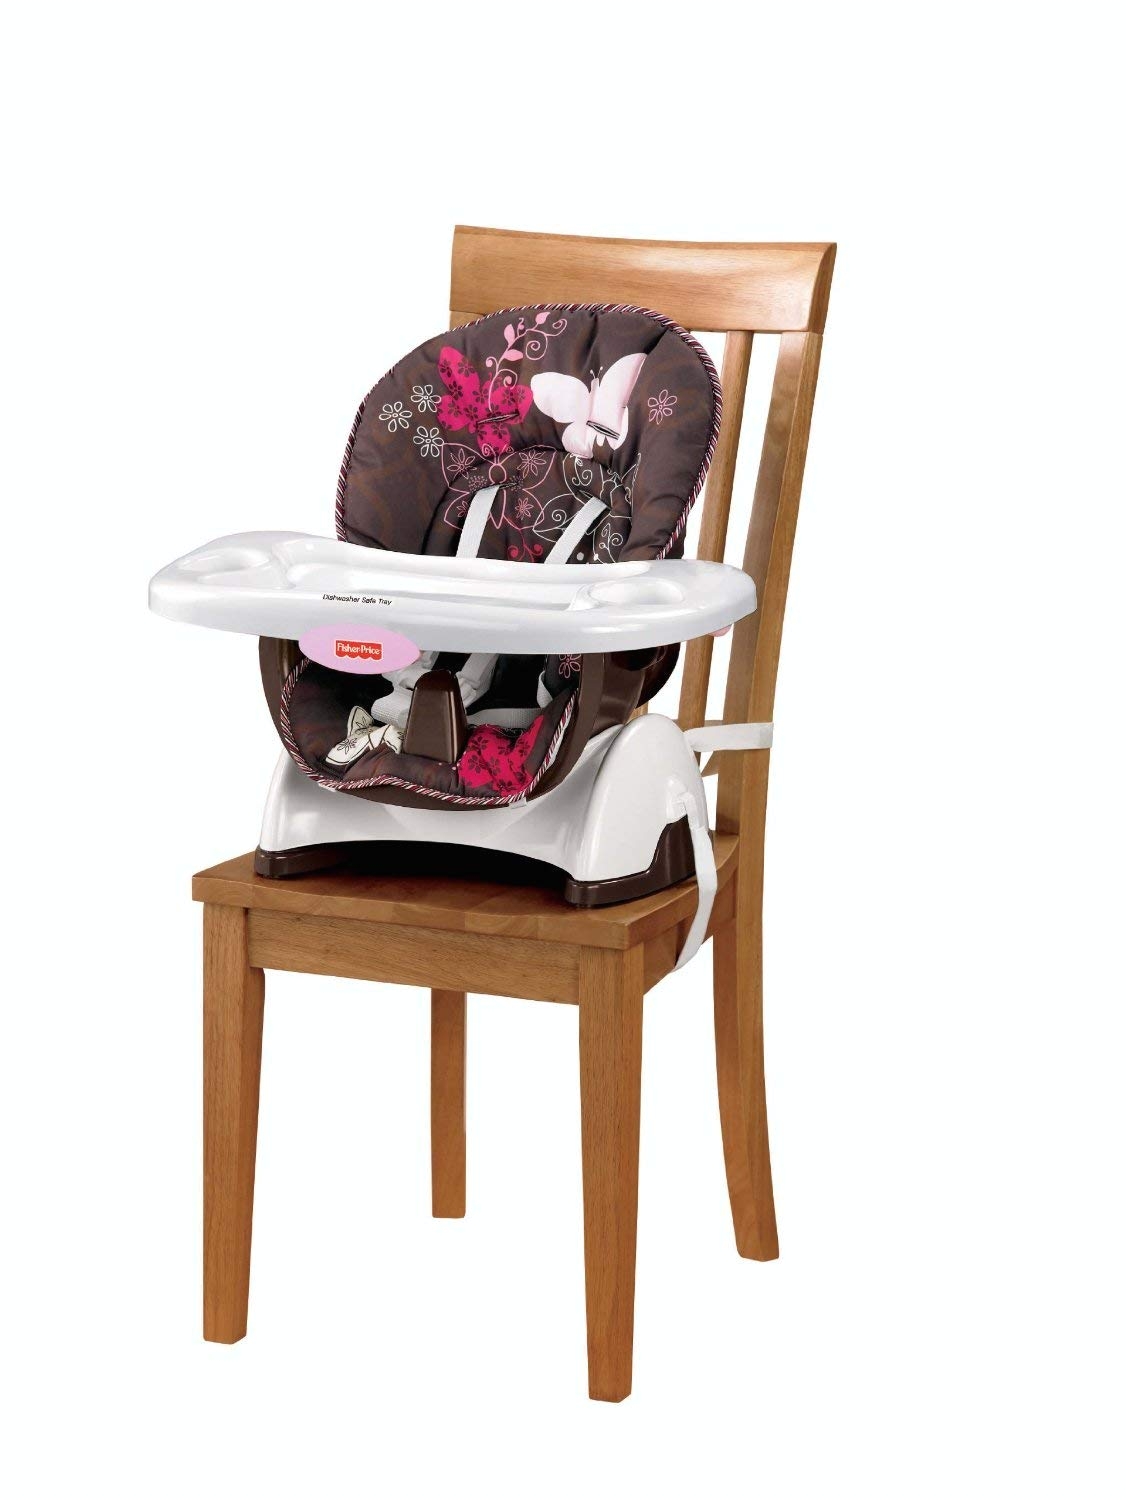 amazon com fisher price space saver high chair mocha butterfly discontinued by manufacturer childrens highchairs baby